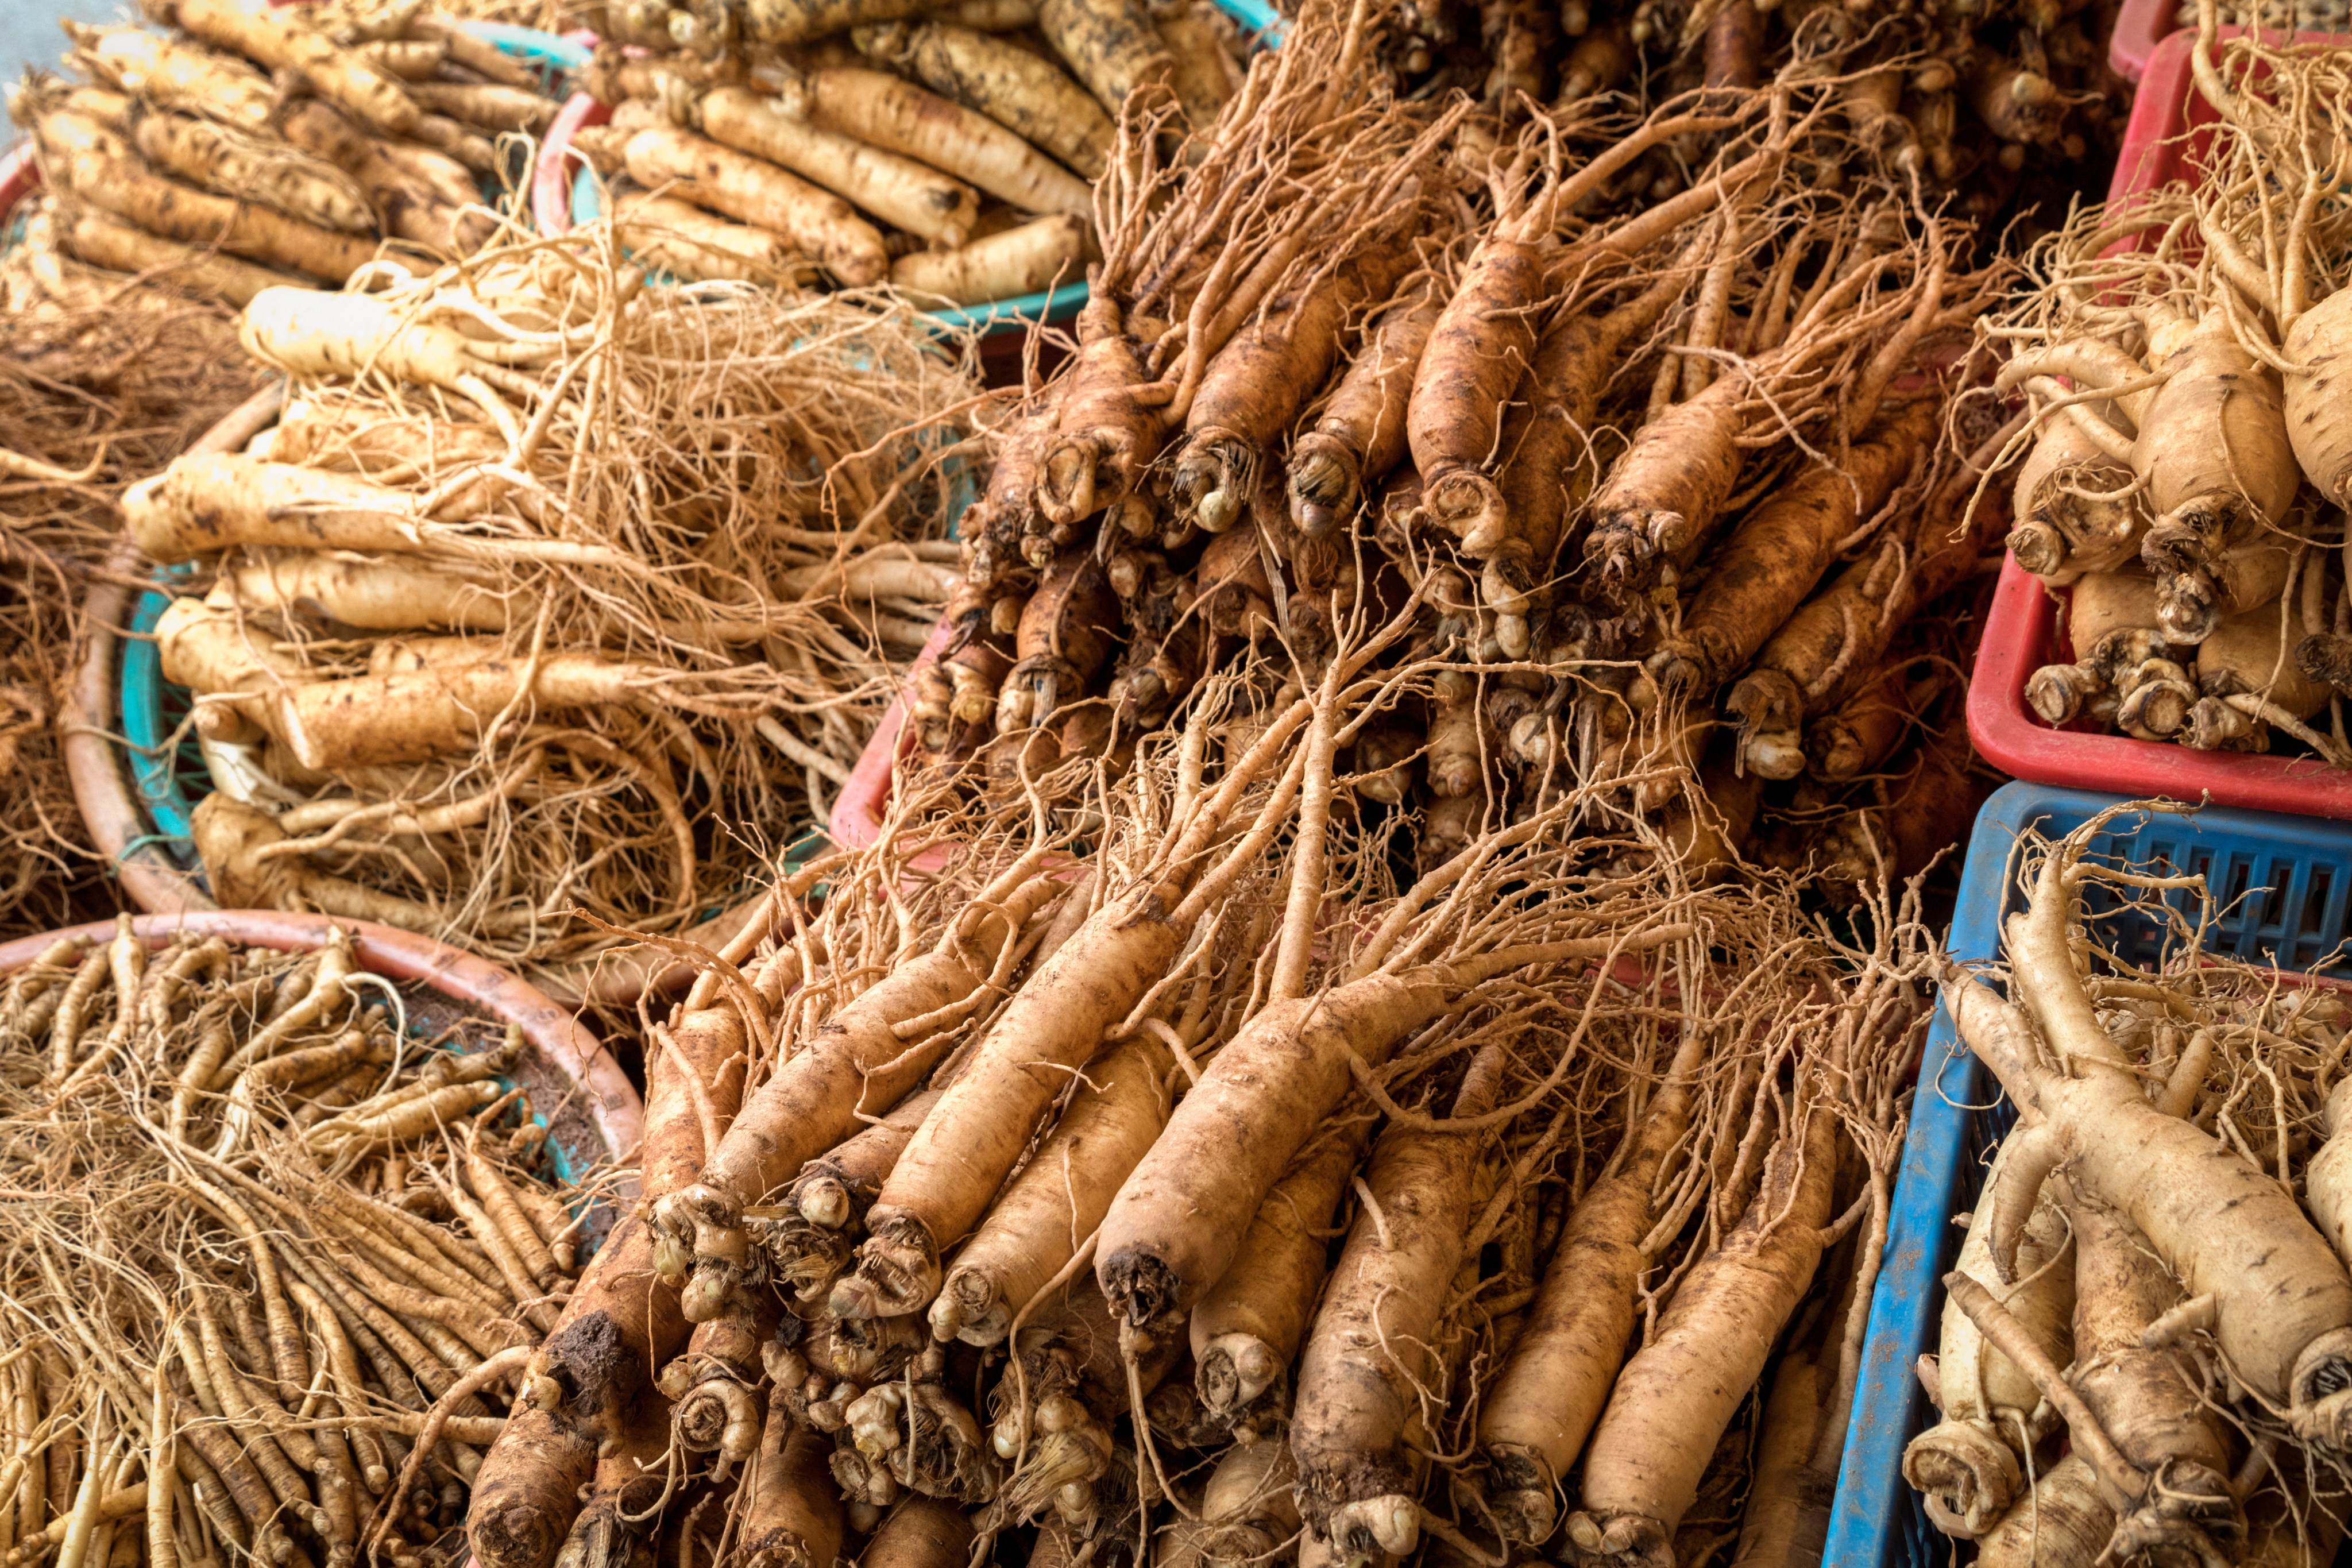 Ginseng in a South Korean market. New varieties of the medicinal root resilient to extreme weather and other environmental threats have been developed, while Korean ginseng brands are stepping up marketing to regain ground in the global health-supplements market. Photo: Getty Images